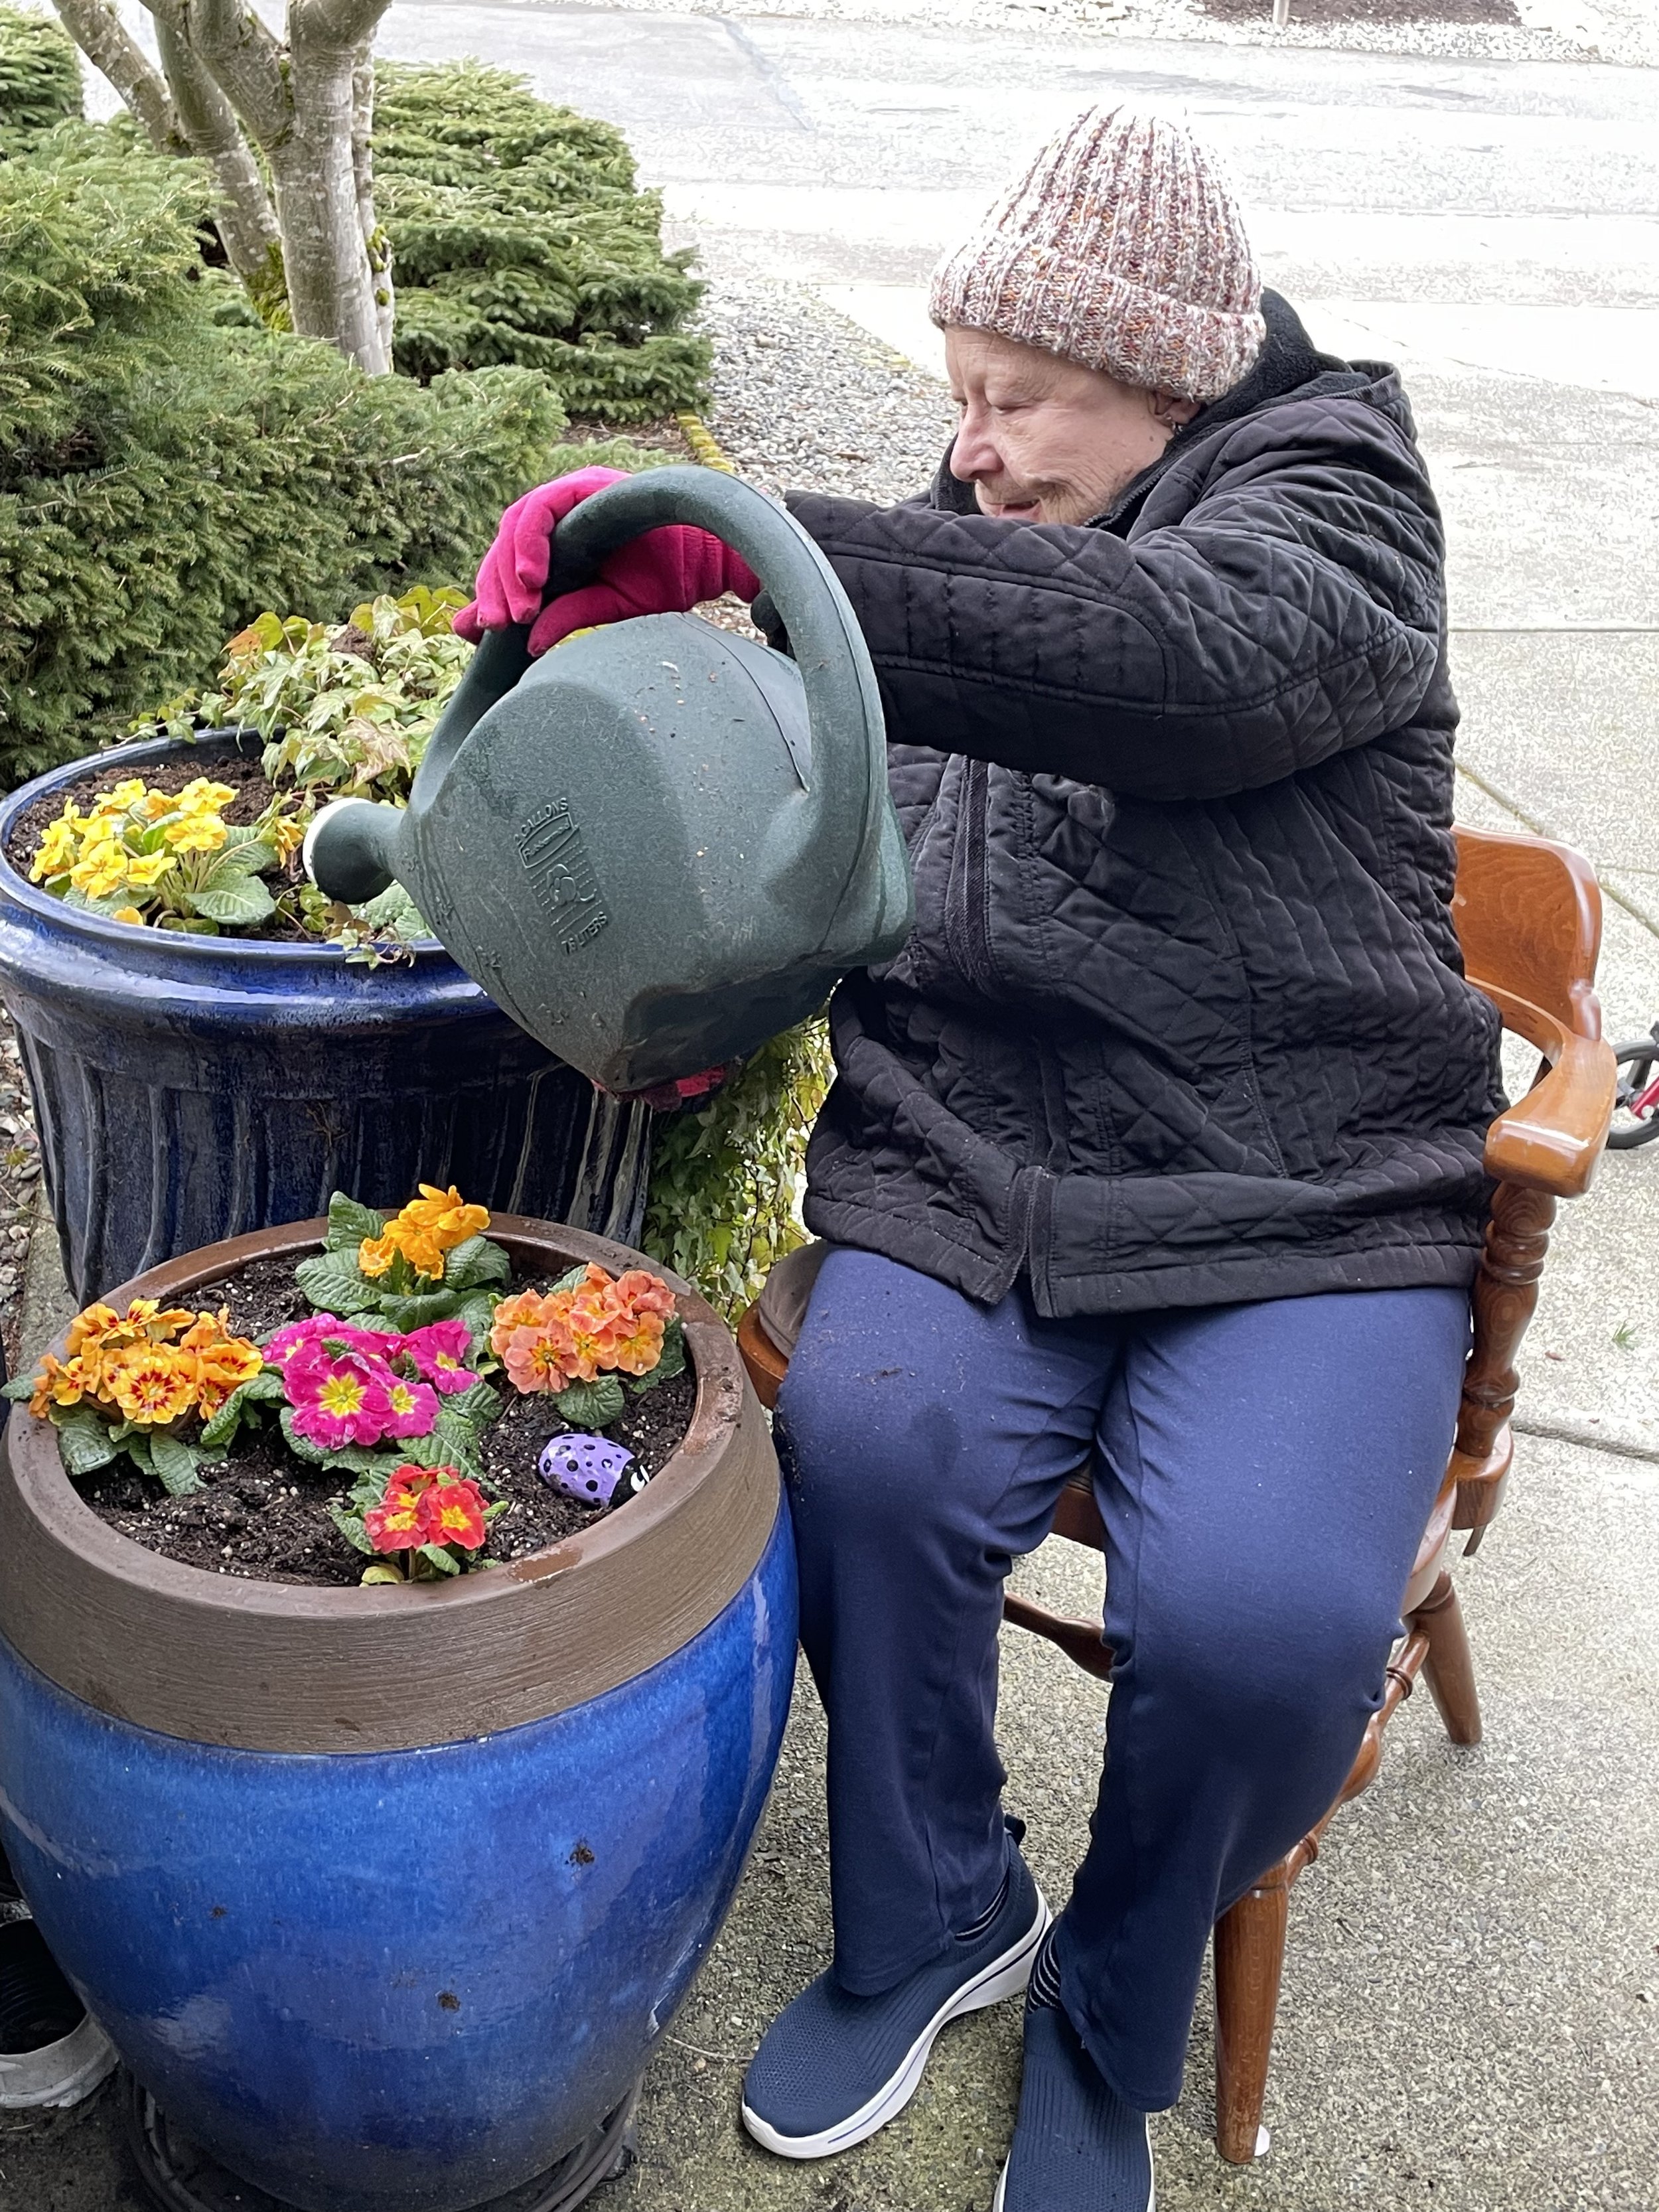 It is never too cold to garden at BBAFH!